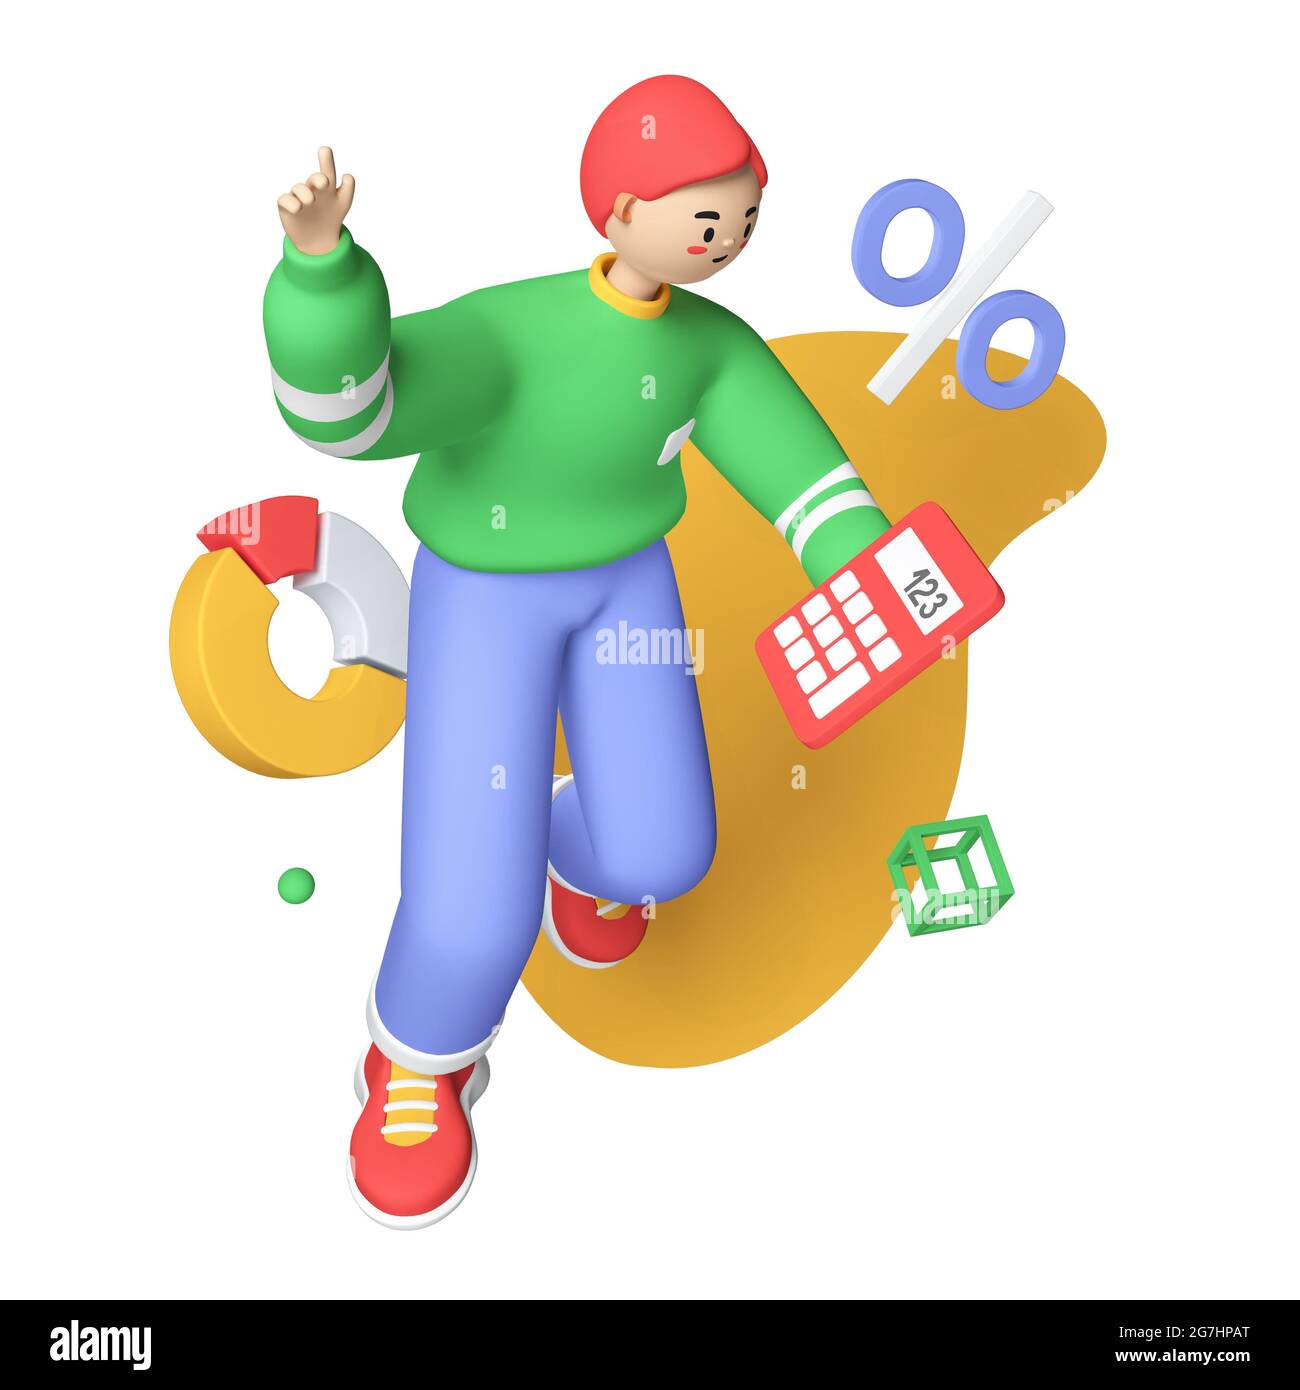 Making calculations - colorful 3D style illustration with male cartoon character. Attentive boy counts on a calculator. Importance of learning science Stock Photo